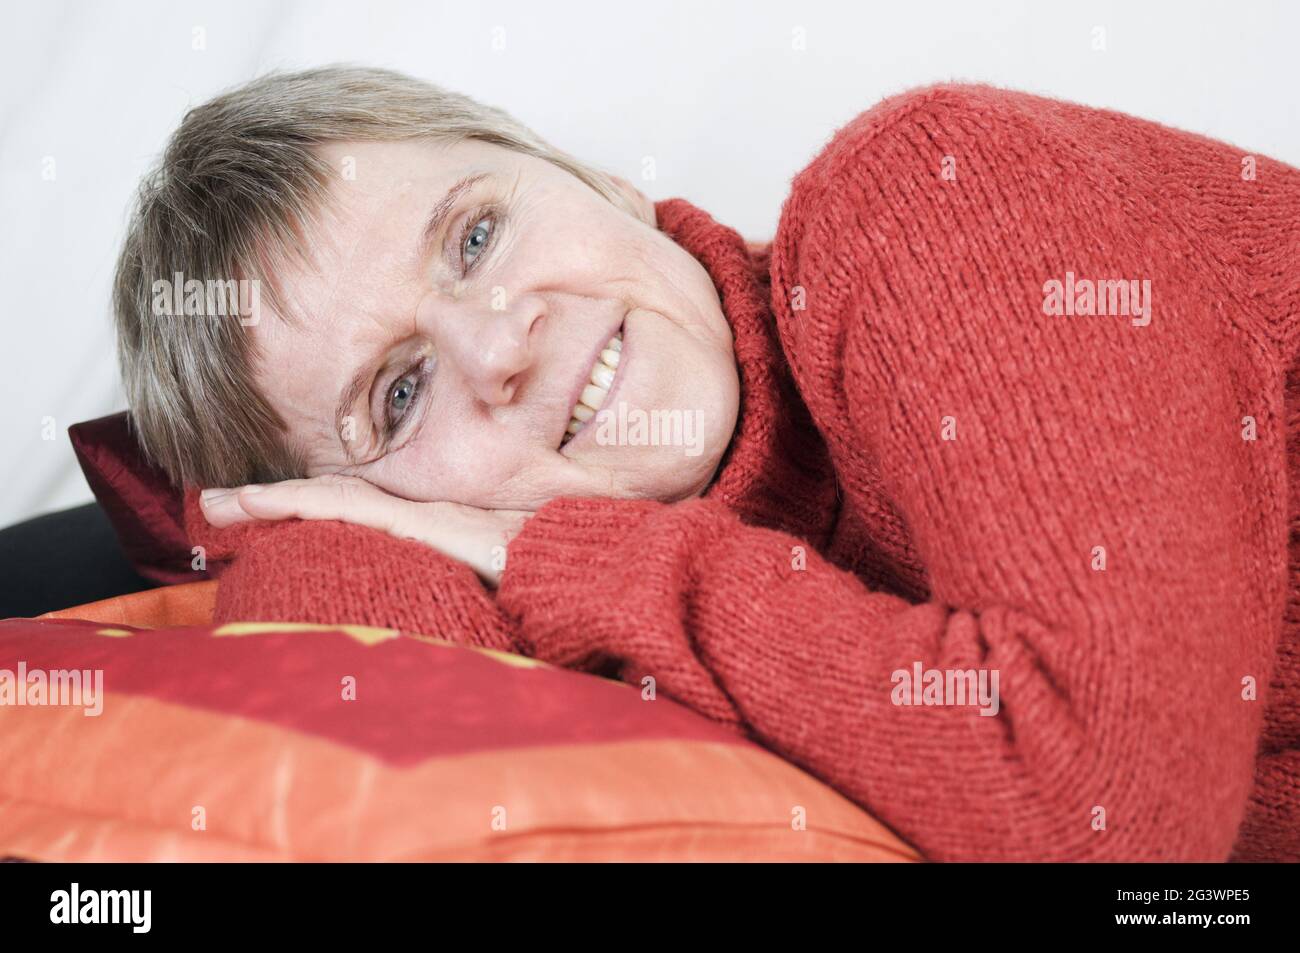 Lying on the side Stock Photo